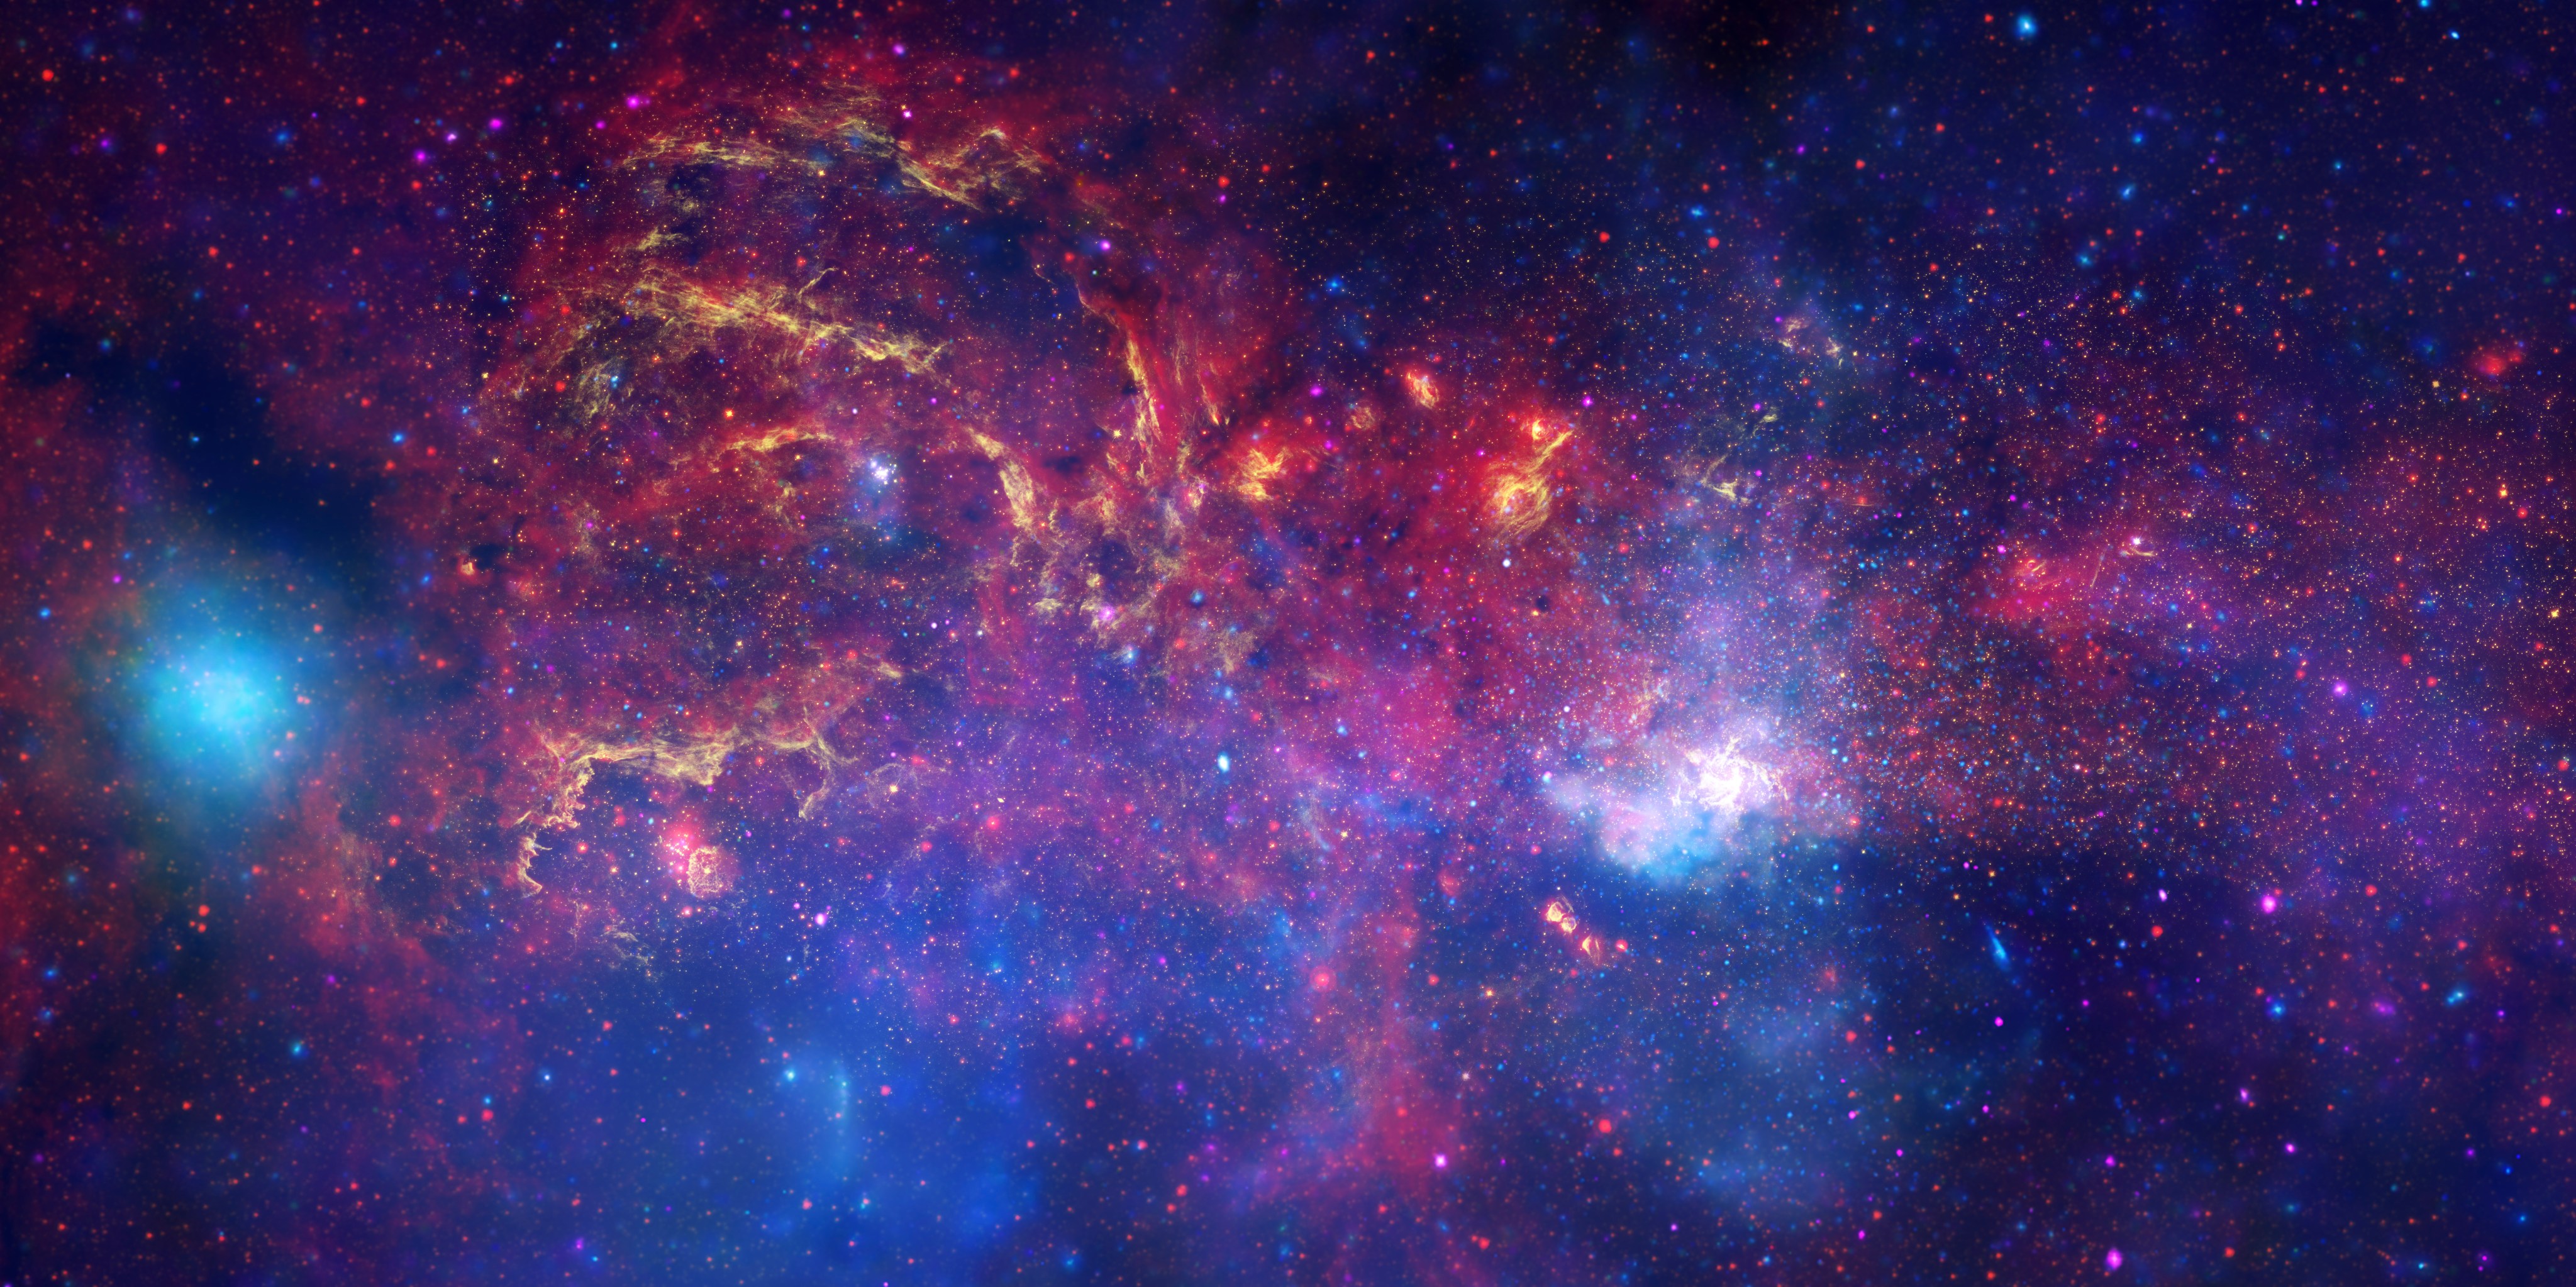 A colorful view of the Milky Way's center region. Colors of red, orange, yellow, blue, pink, and white form clouds and filaments against a dark backdrop.